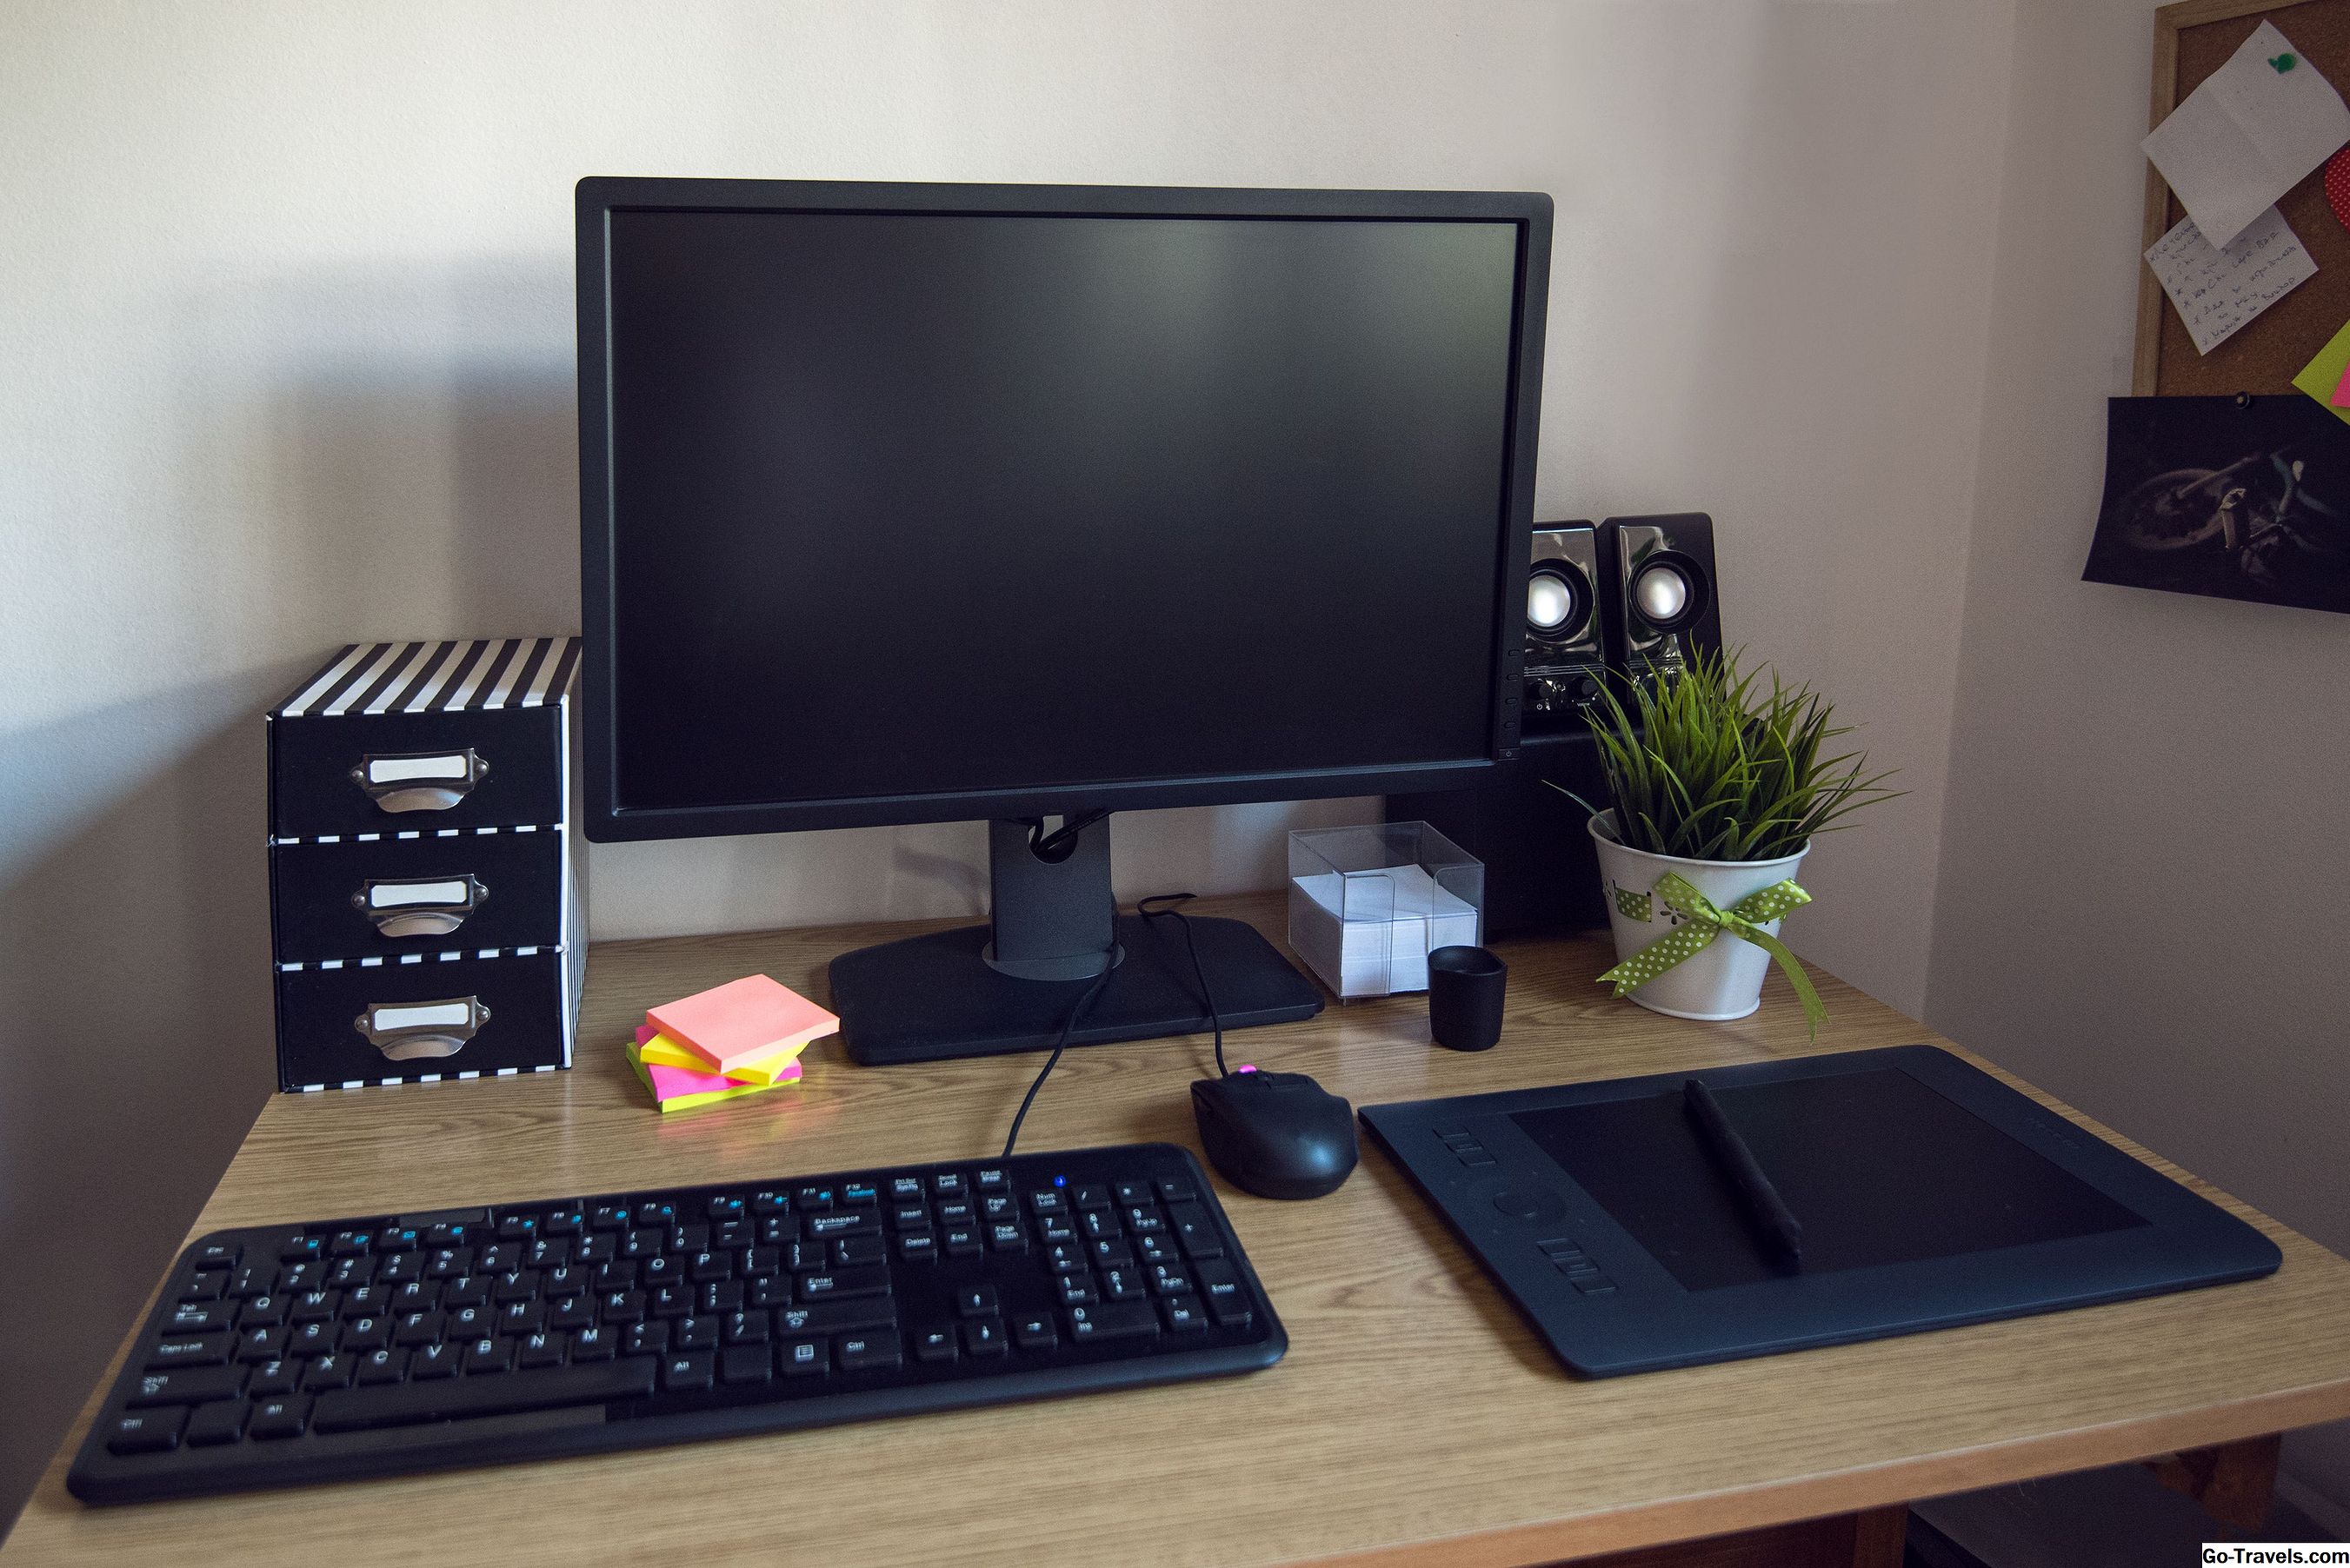 Desktop computers for students: an affordable and reliable choice